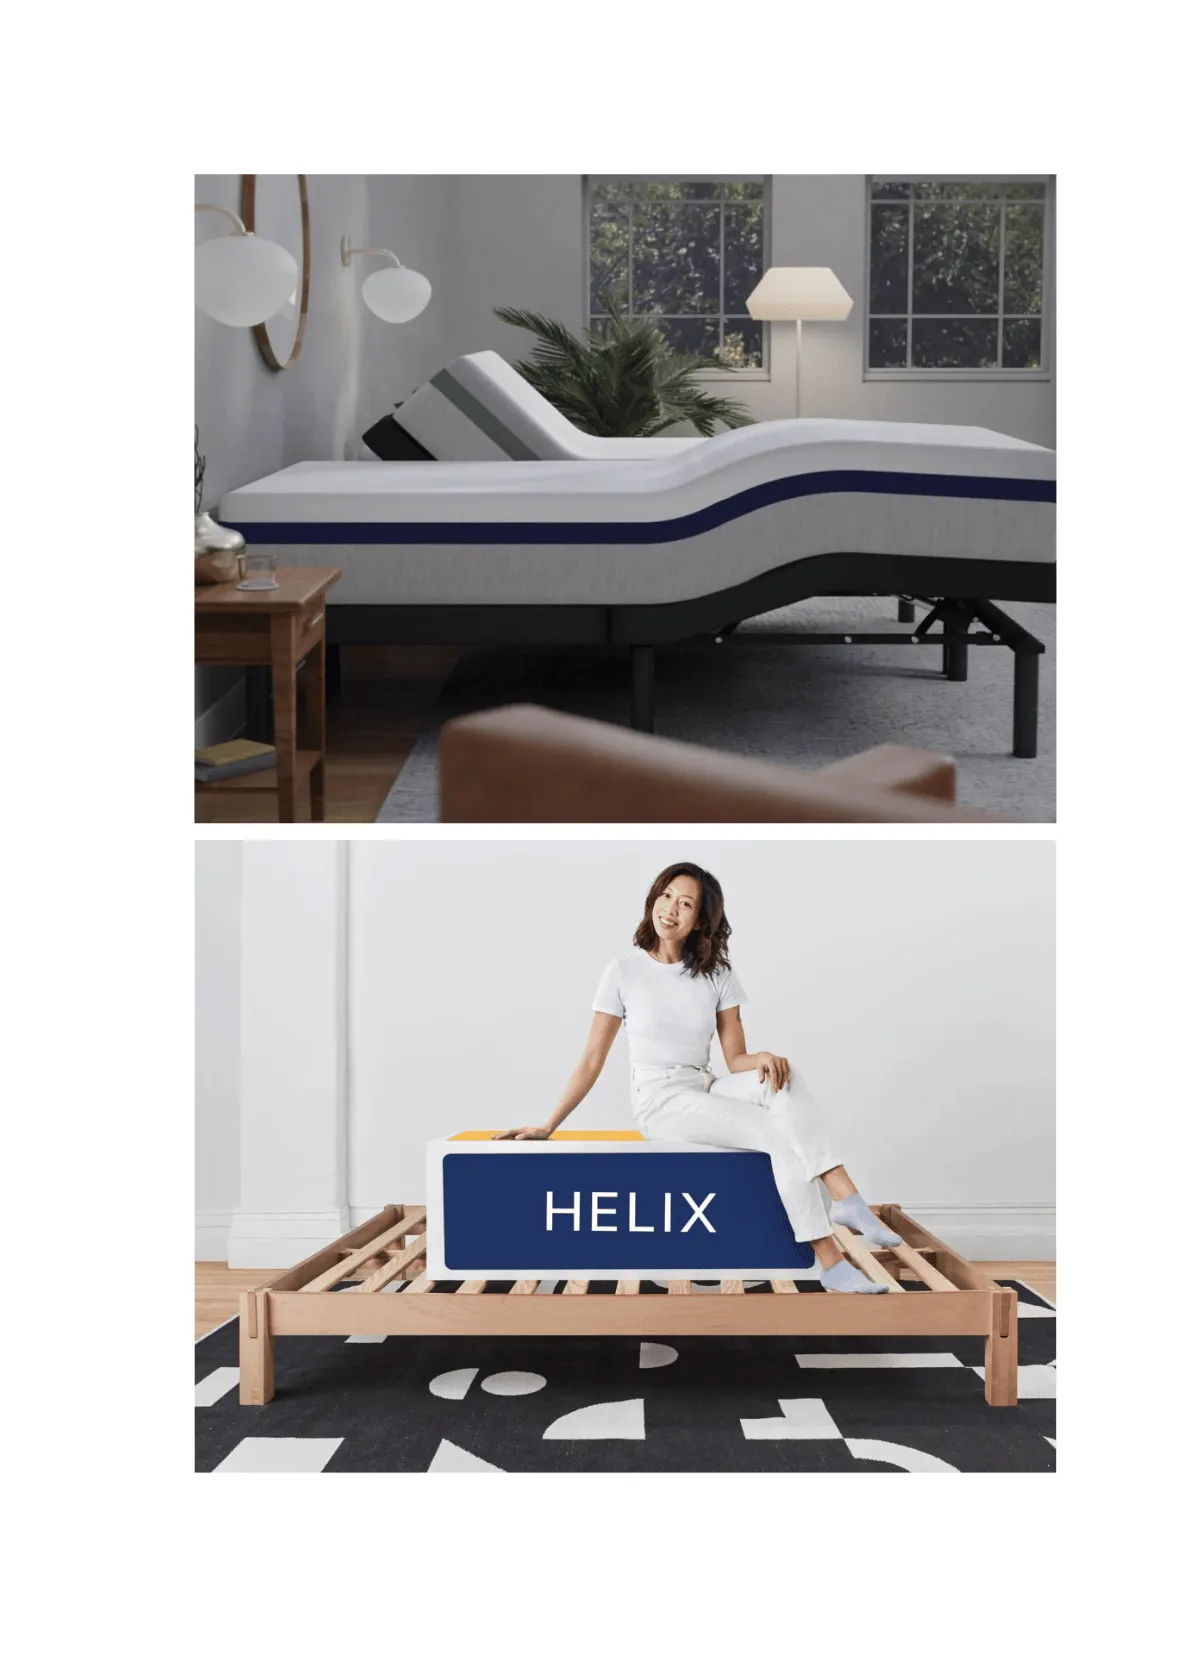 "Discover the 5 Best Helix Bed Frame Options for Comfy Sleep"